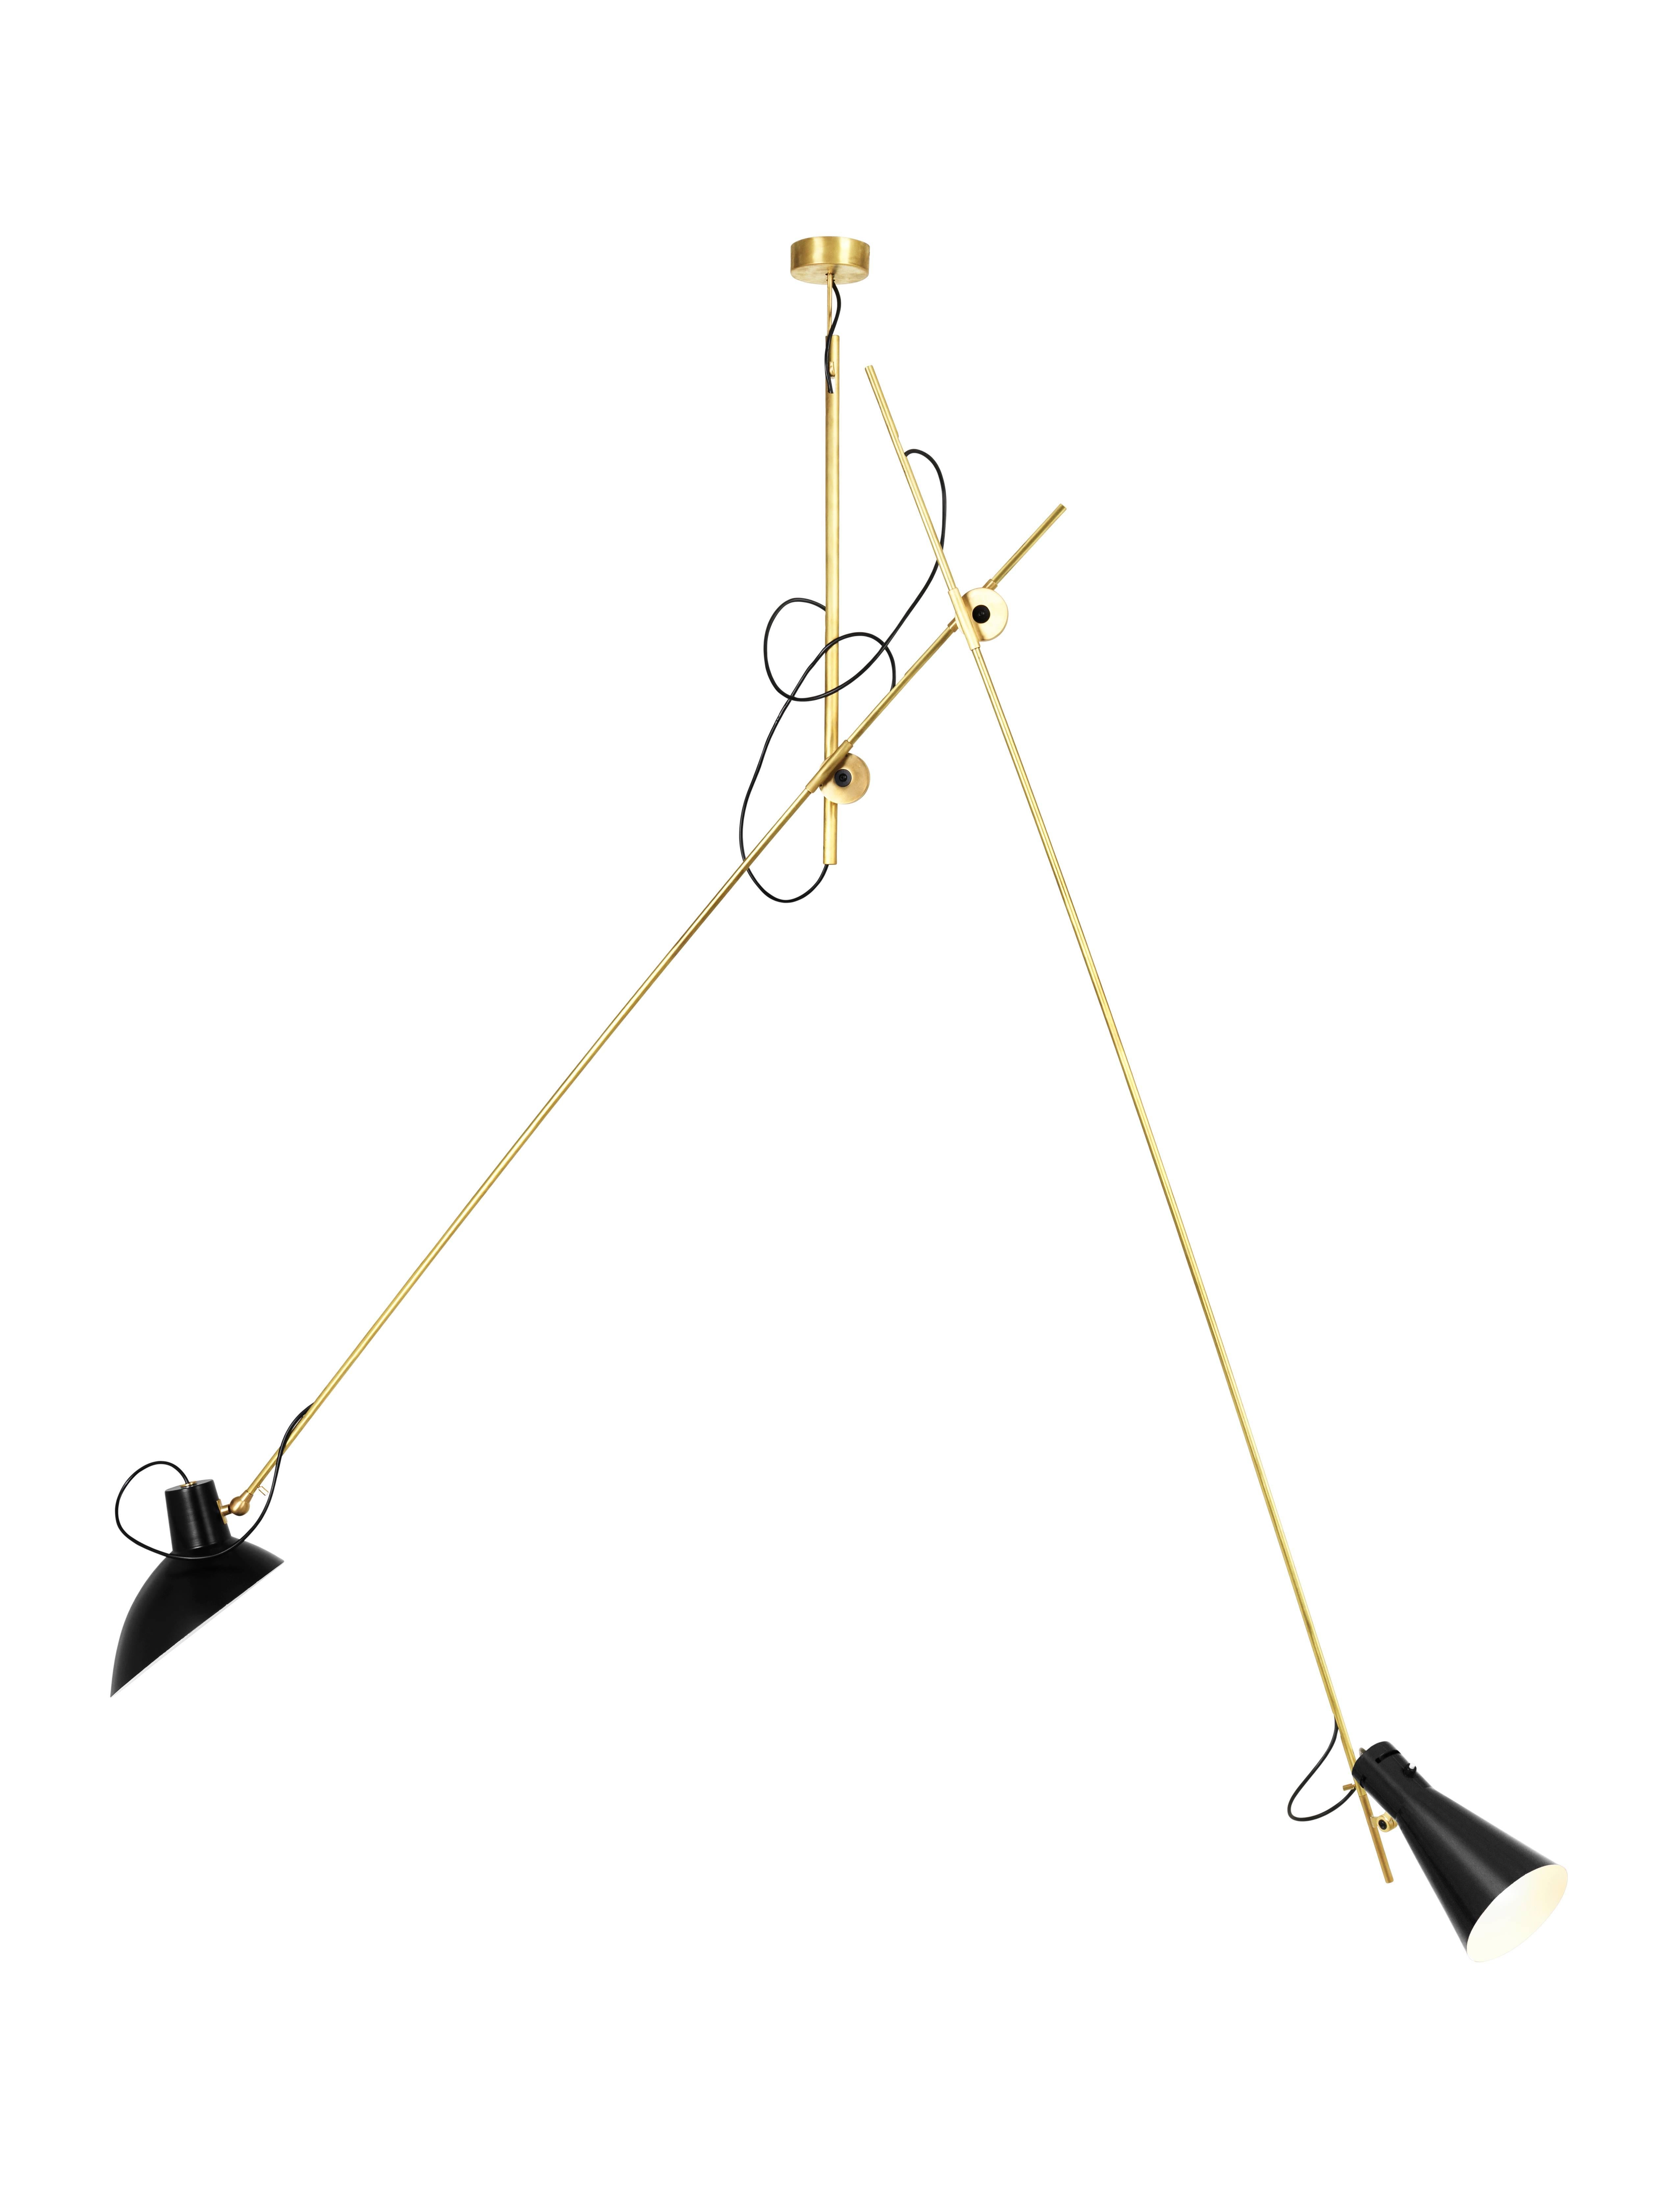 Contemporary Vittoriano Viganò 'VV Suspension' Lamp in Black and Brass